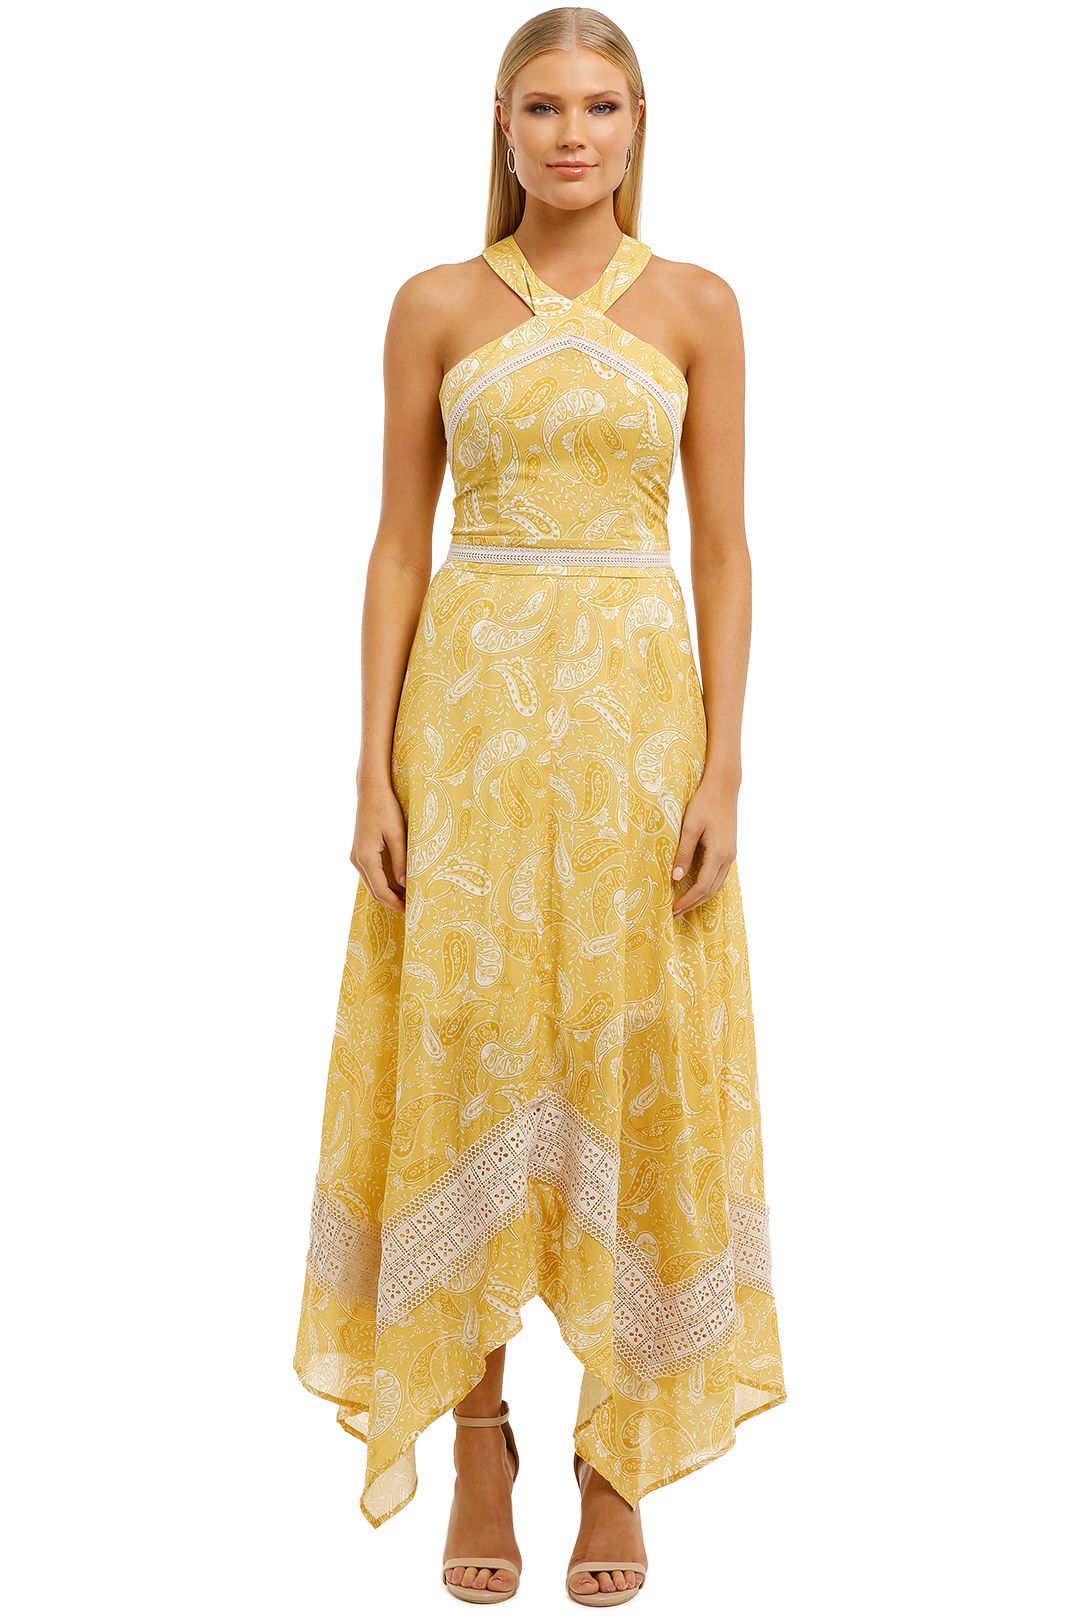 We-Are-Kindred-Sorrento-Midi-Dress-Sunflower-Paisley-Front